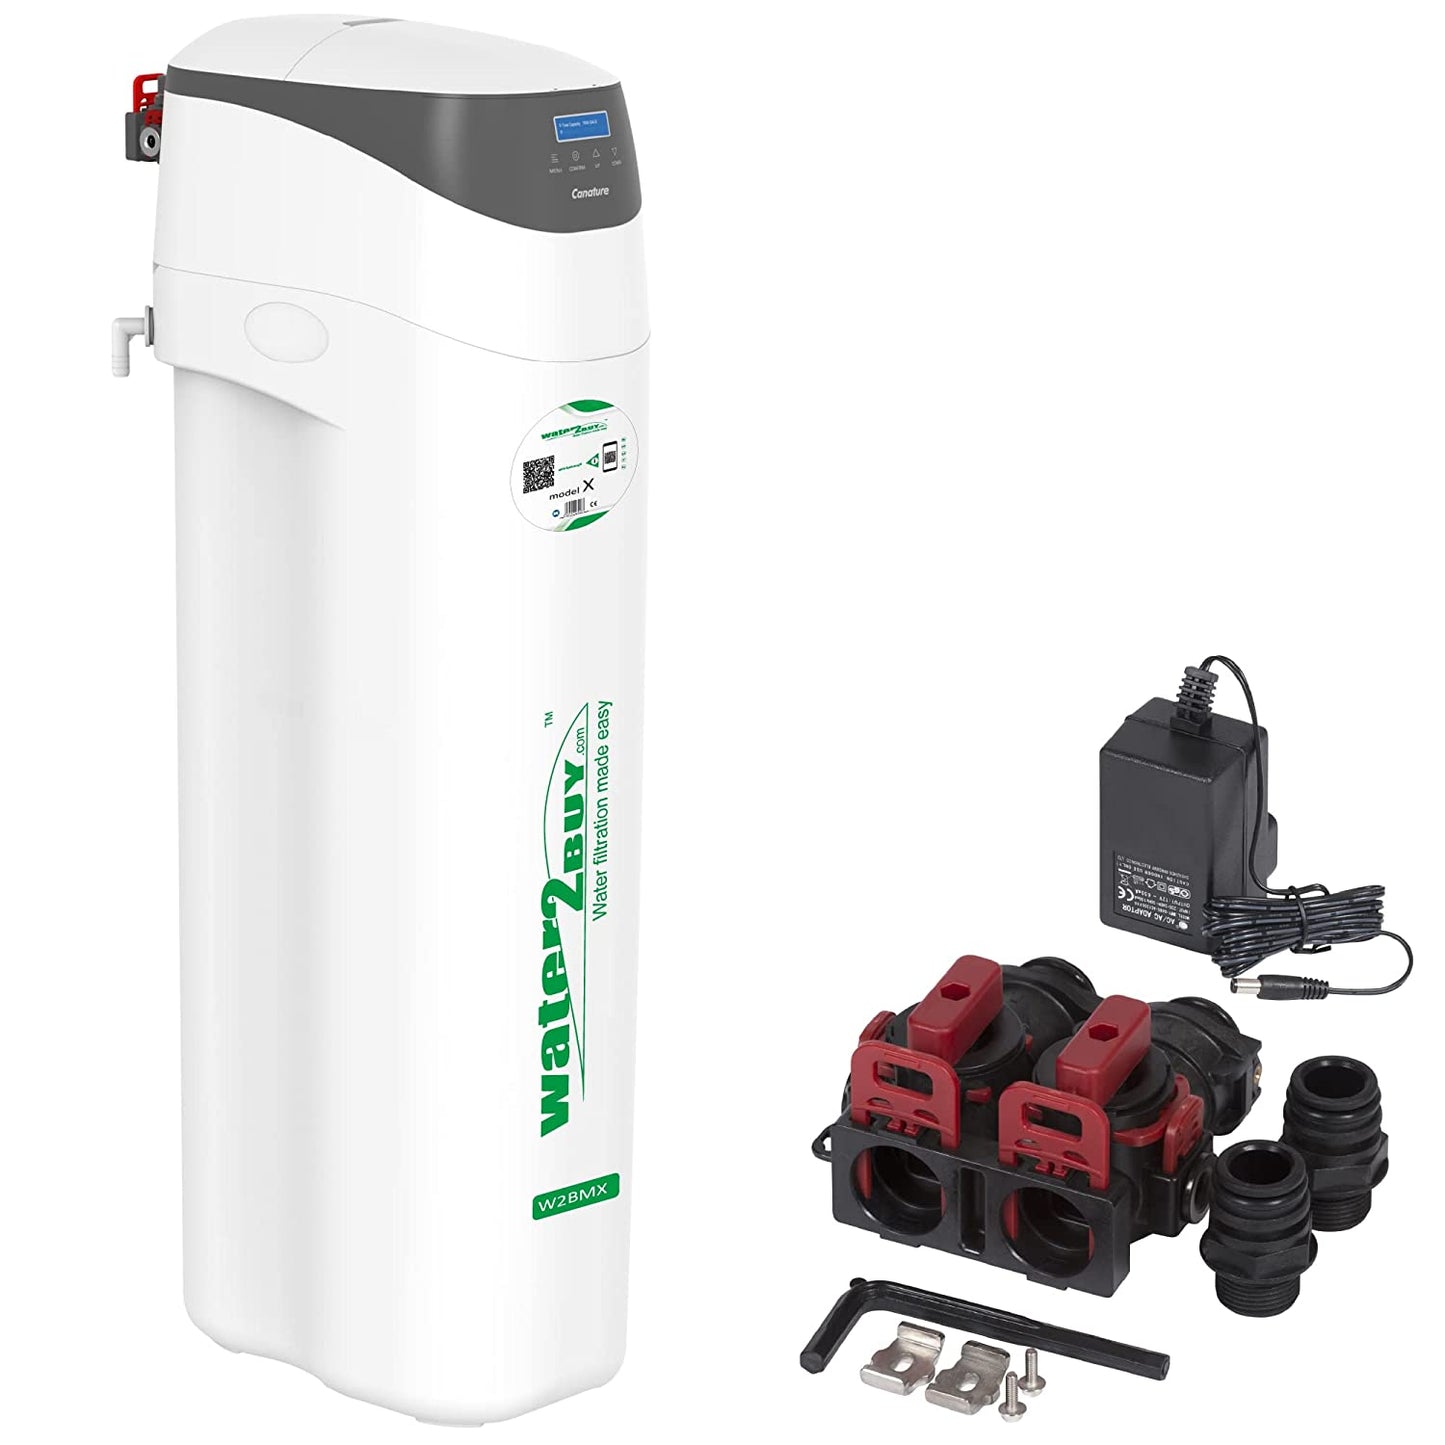 Water2Buy Model X Water Softener | W2BMX Next Generation High Efficiency Water Softener Up to 10 people